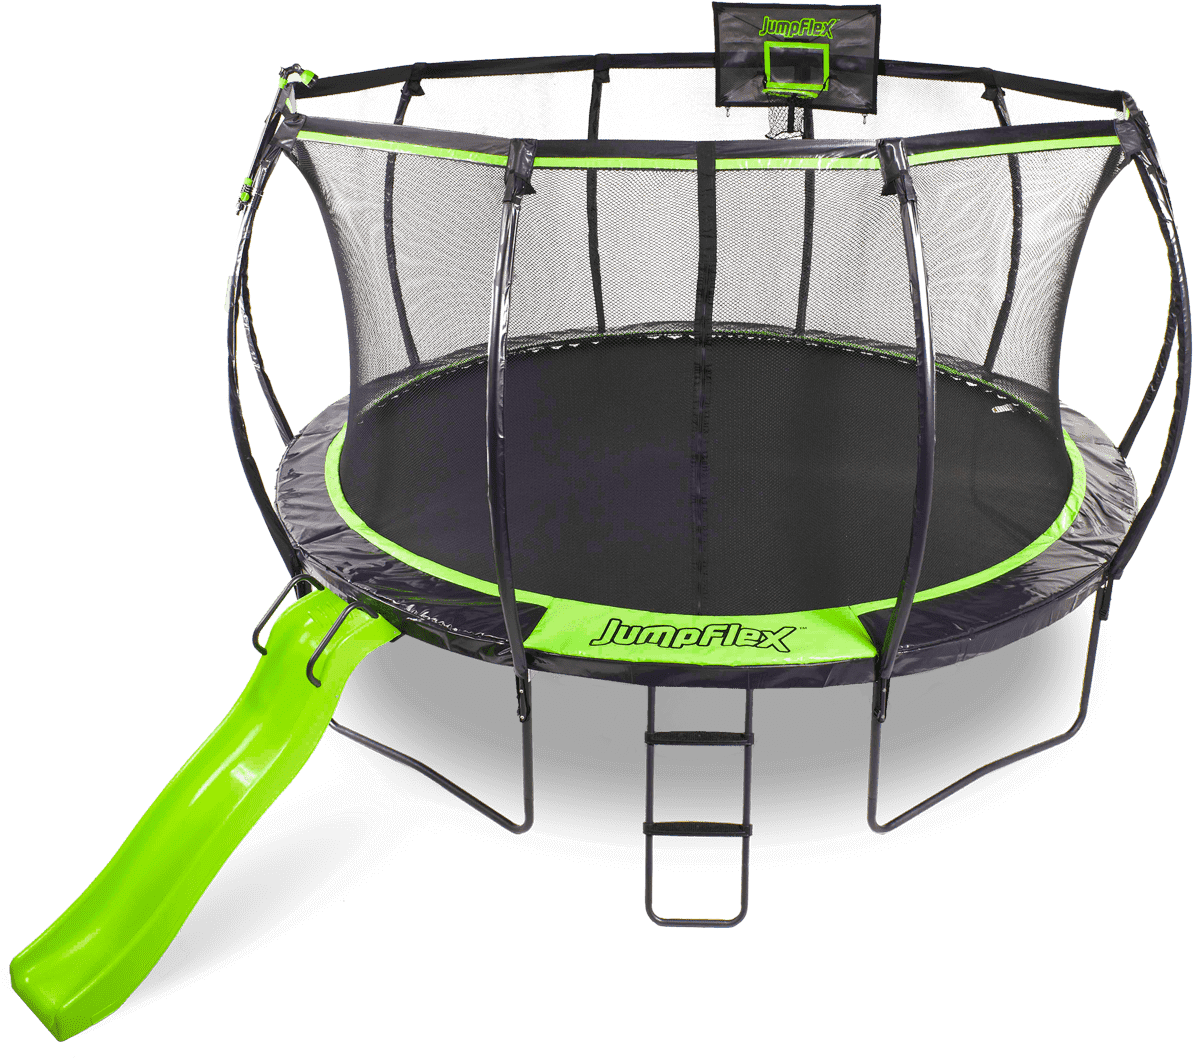 A Trampoline With A Slide